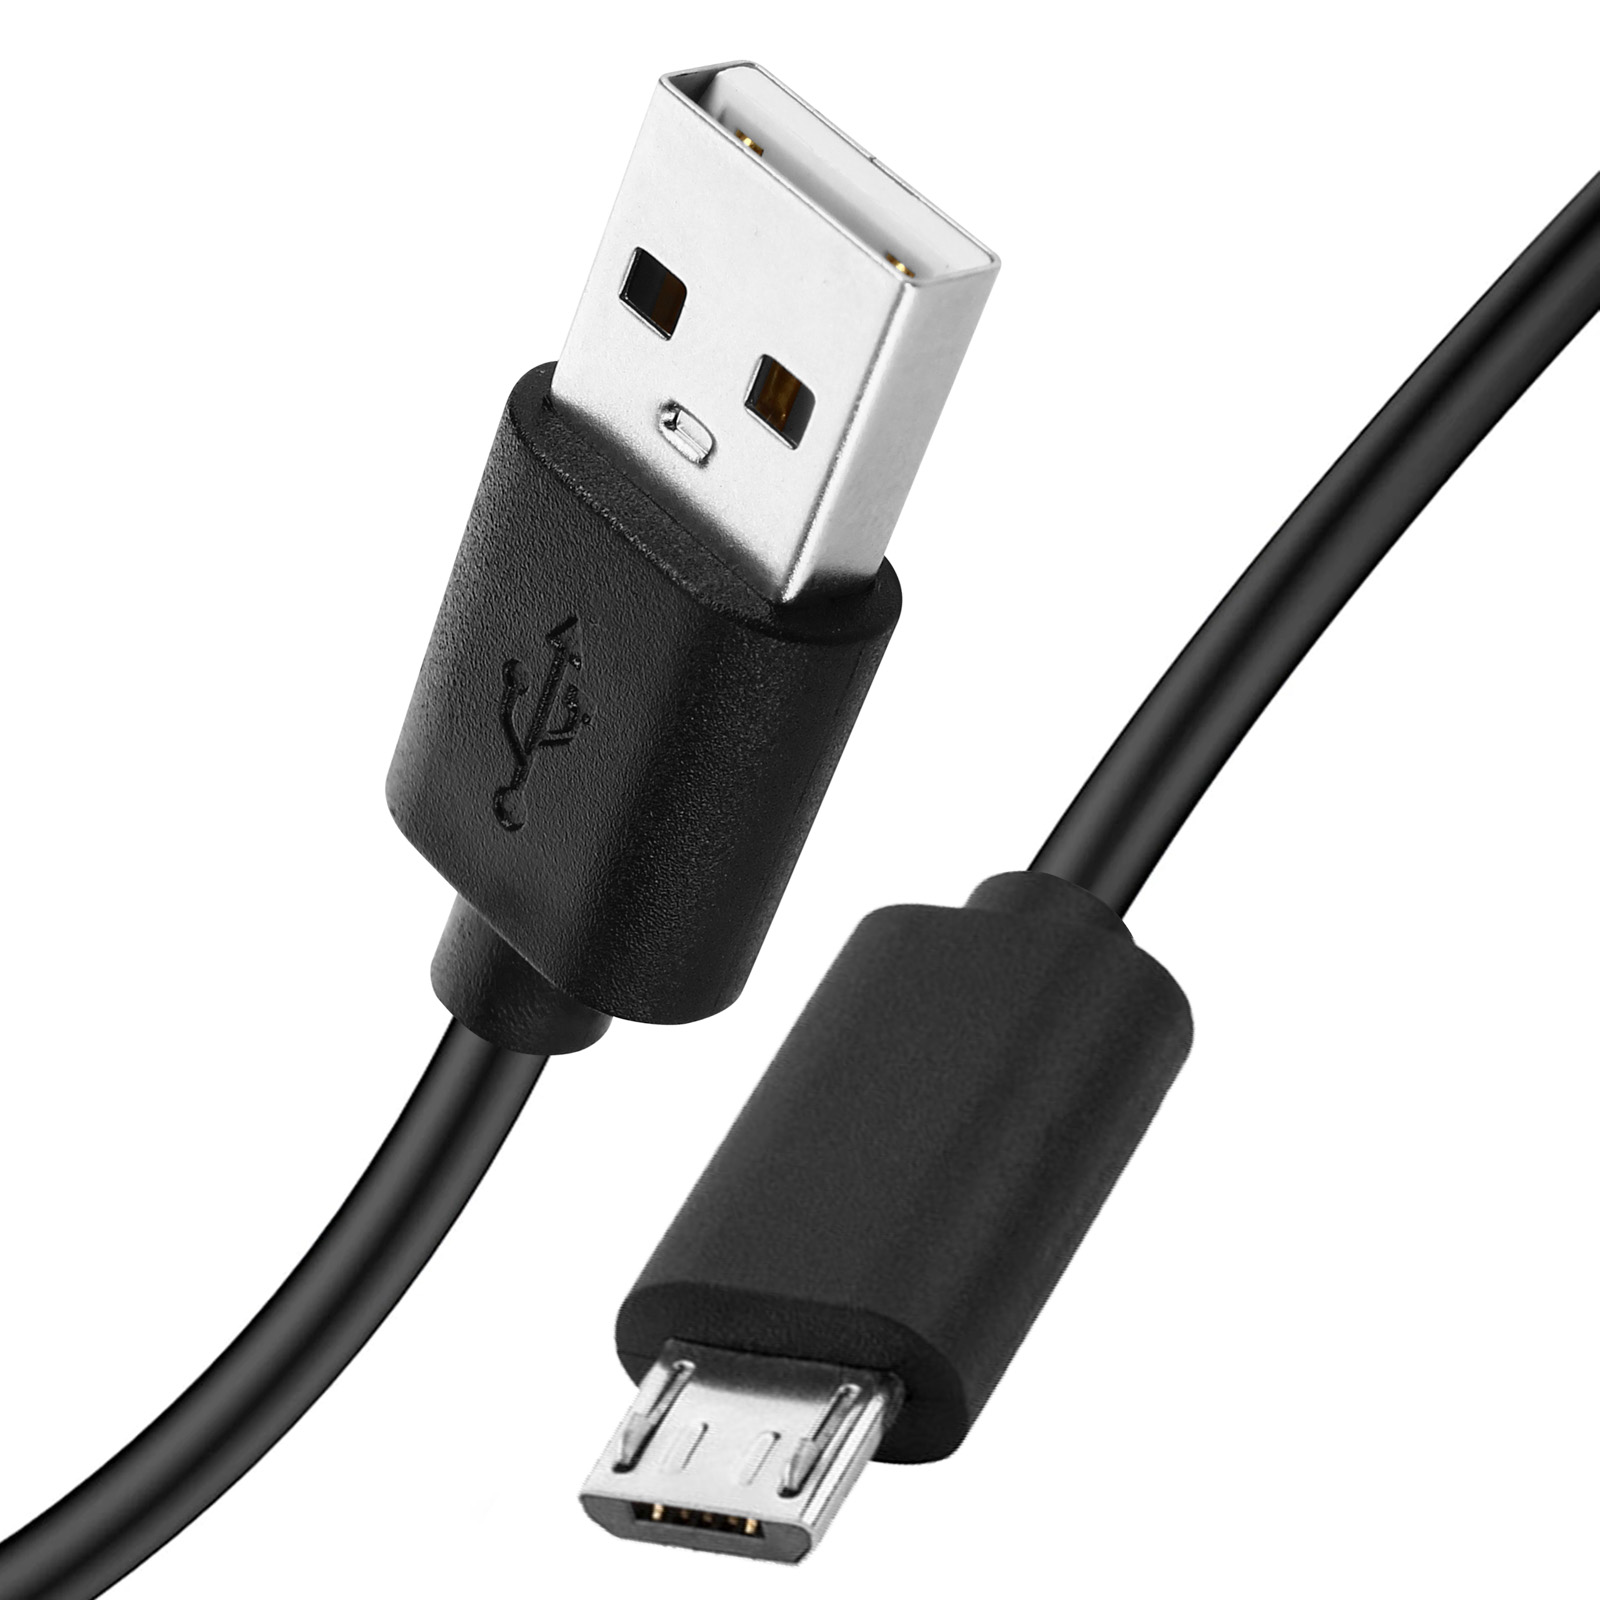 Samsung Galaxy S2 Chargeur secteur + cable BLANC Micro USB d